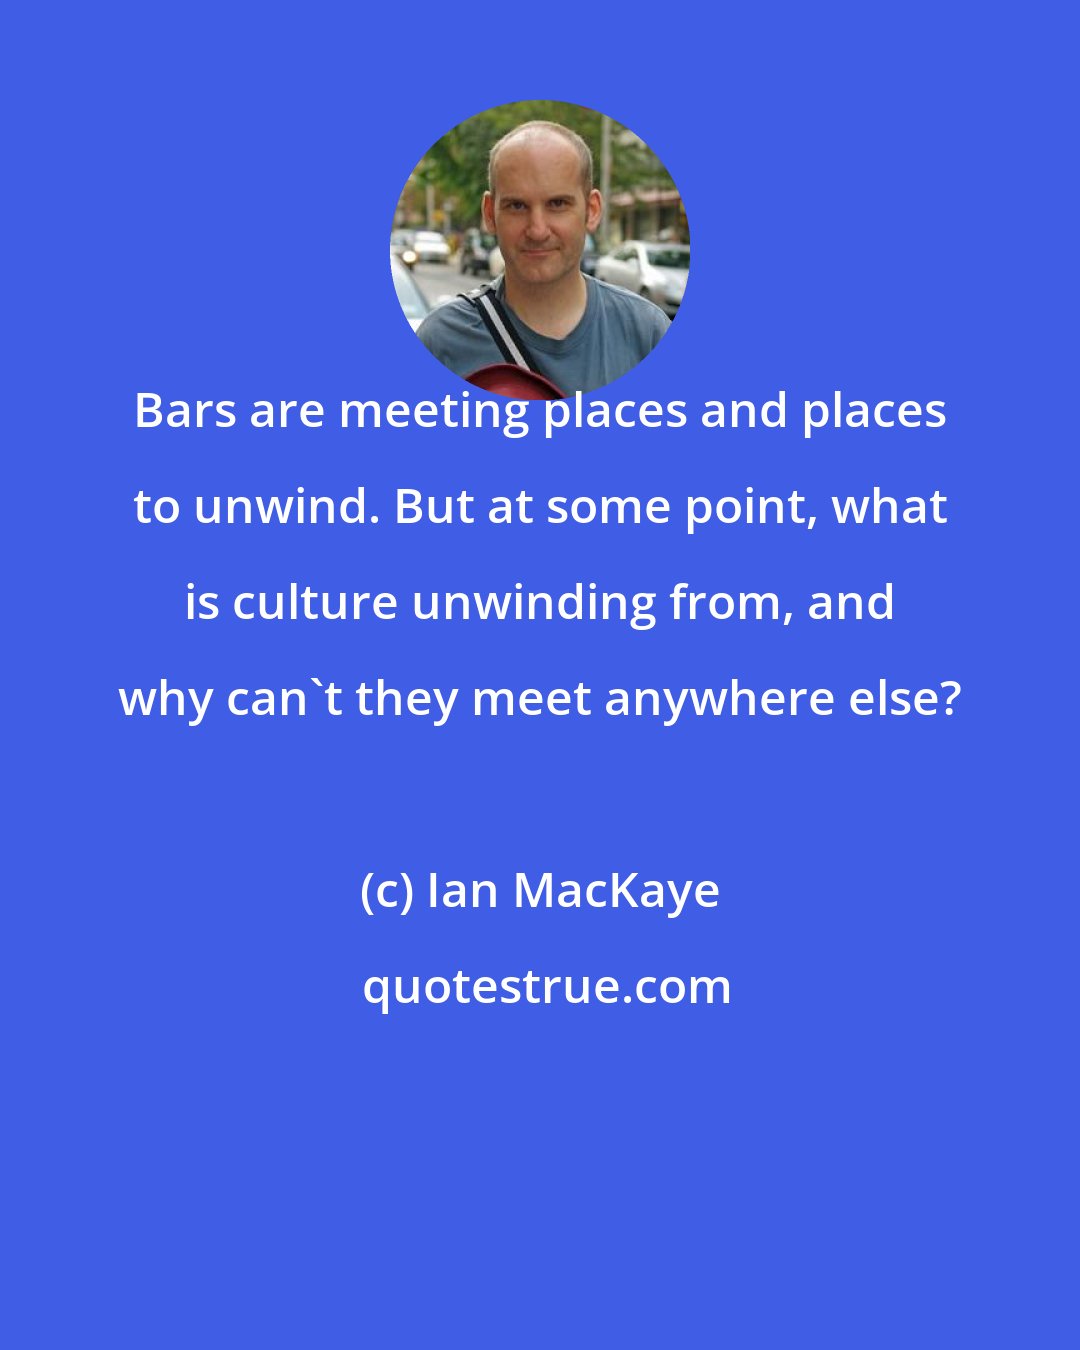 Ian MacKaye: Bars are meeting places and places to unwind. But at some point, what is culture unwinding from, and why can't they meet anywhere else?